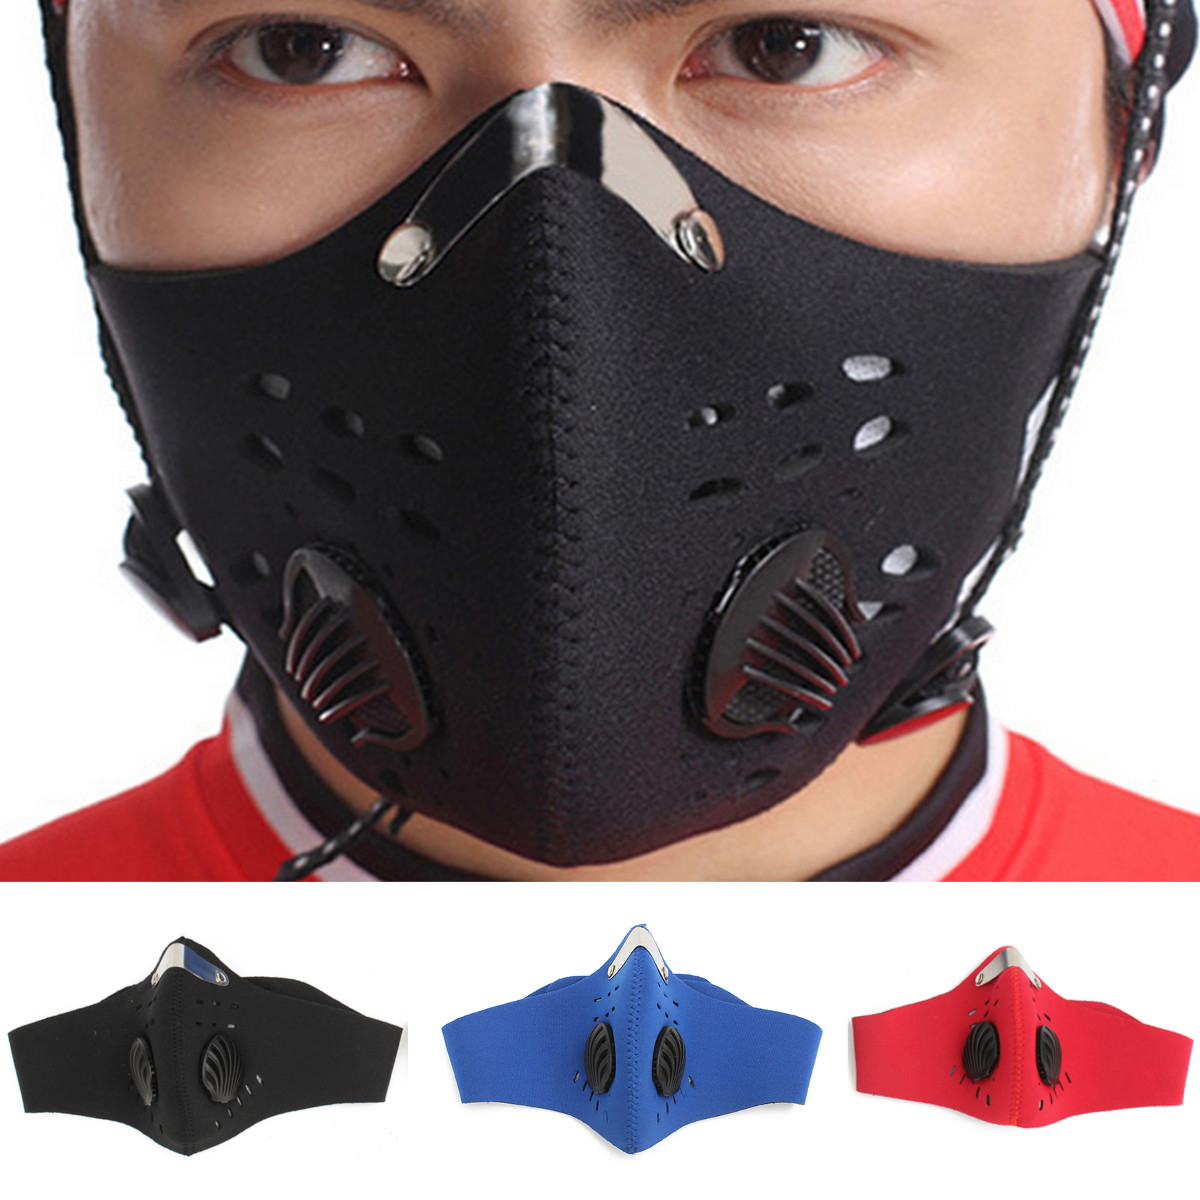 Motorcycle Racing PM2.5 Gas Protection Filter Respirator Dust Face Mask Head 1